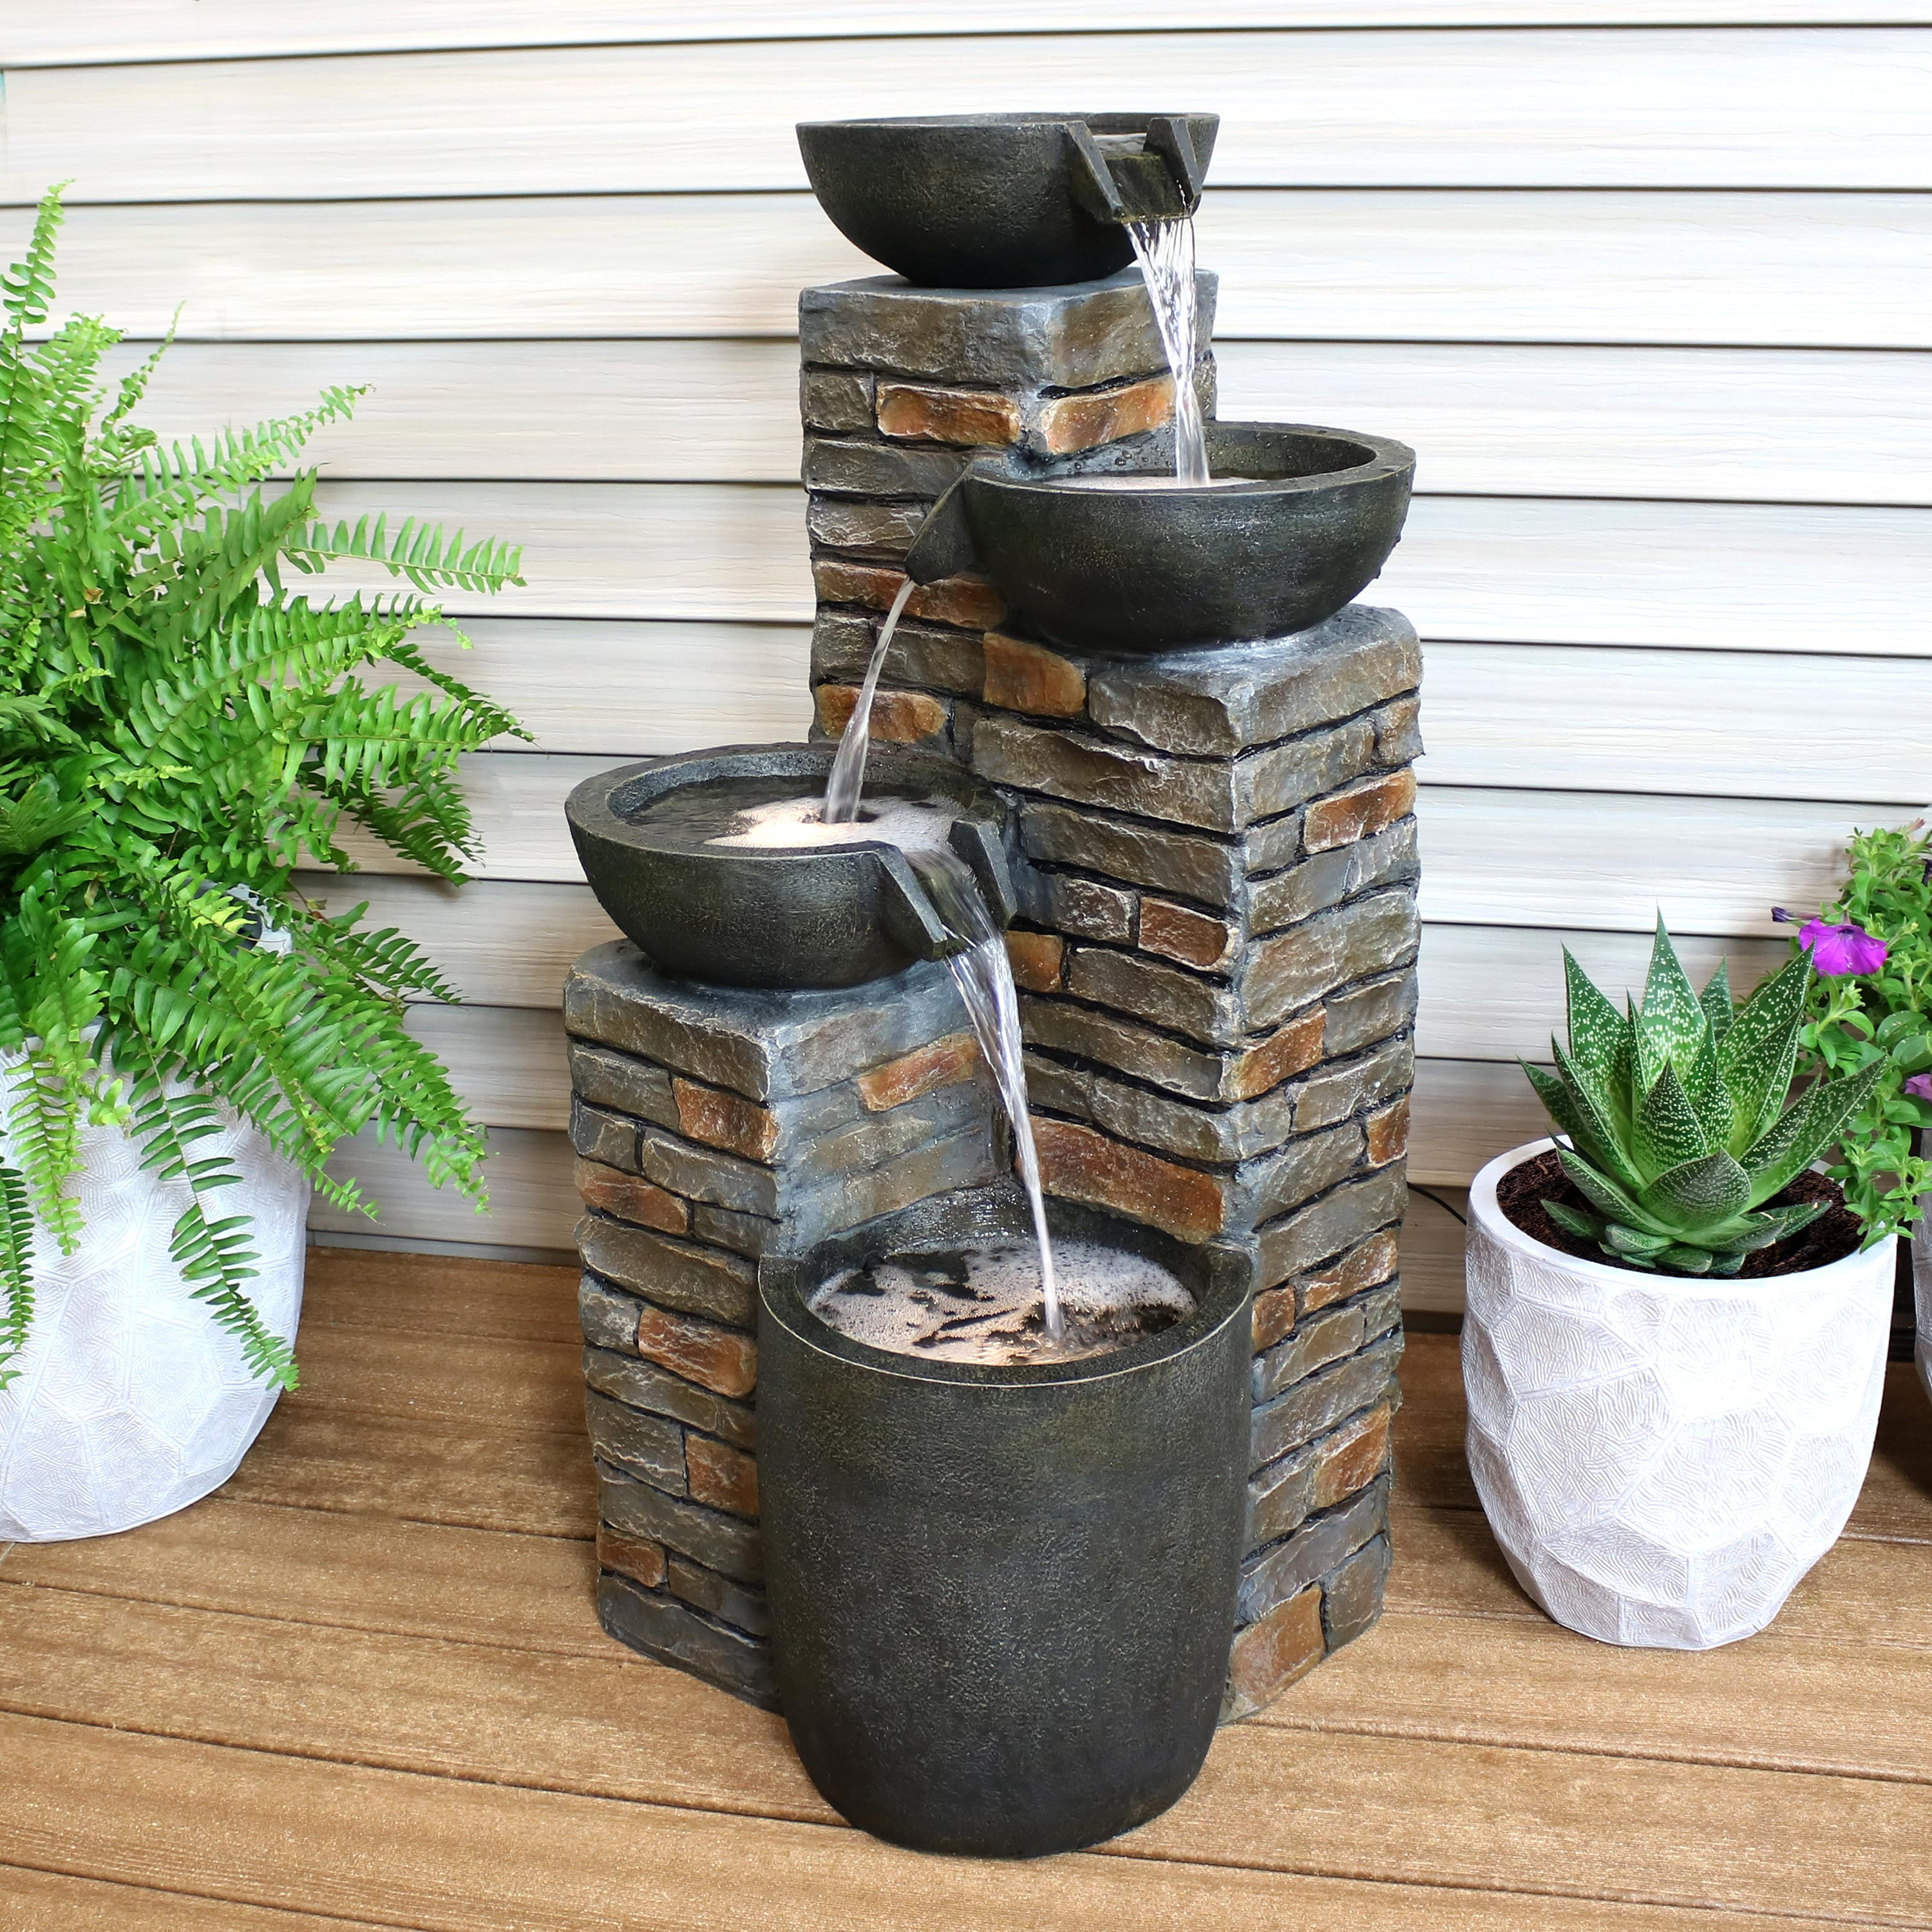 Sunnydaze Outdoor Water Fountain -Staggered Pottery Bowls - LED Lights - Perfect for Garden 